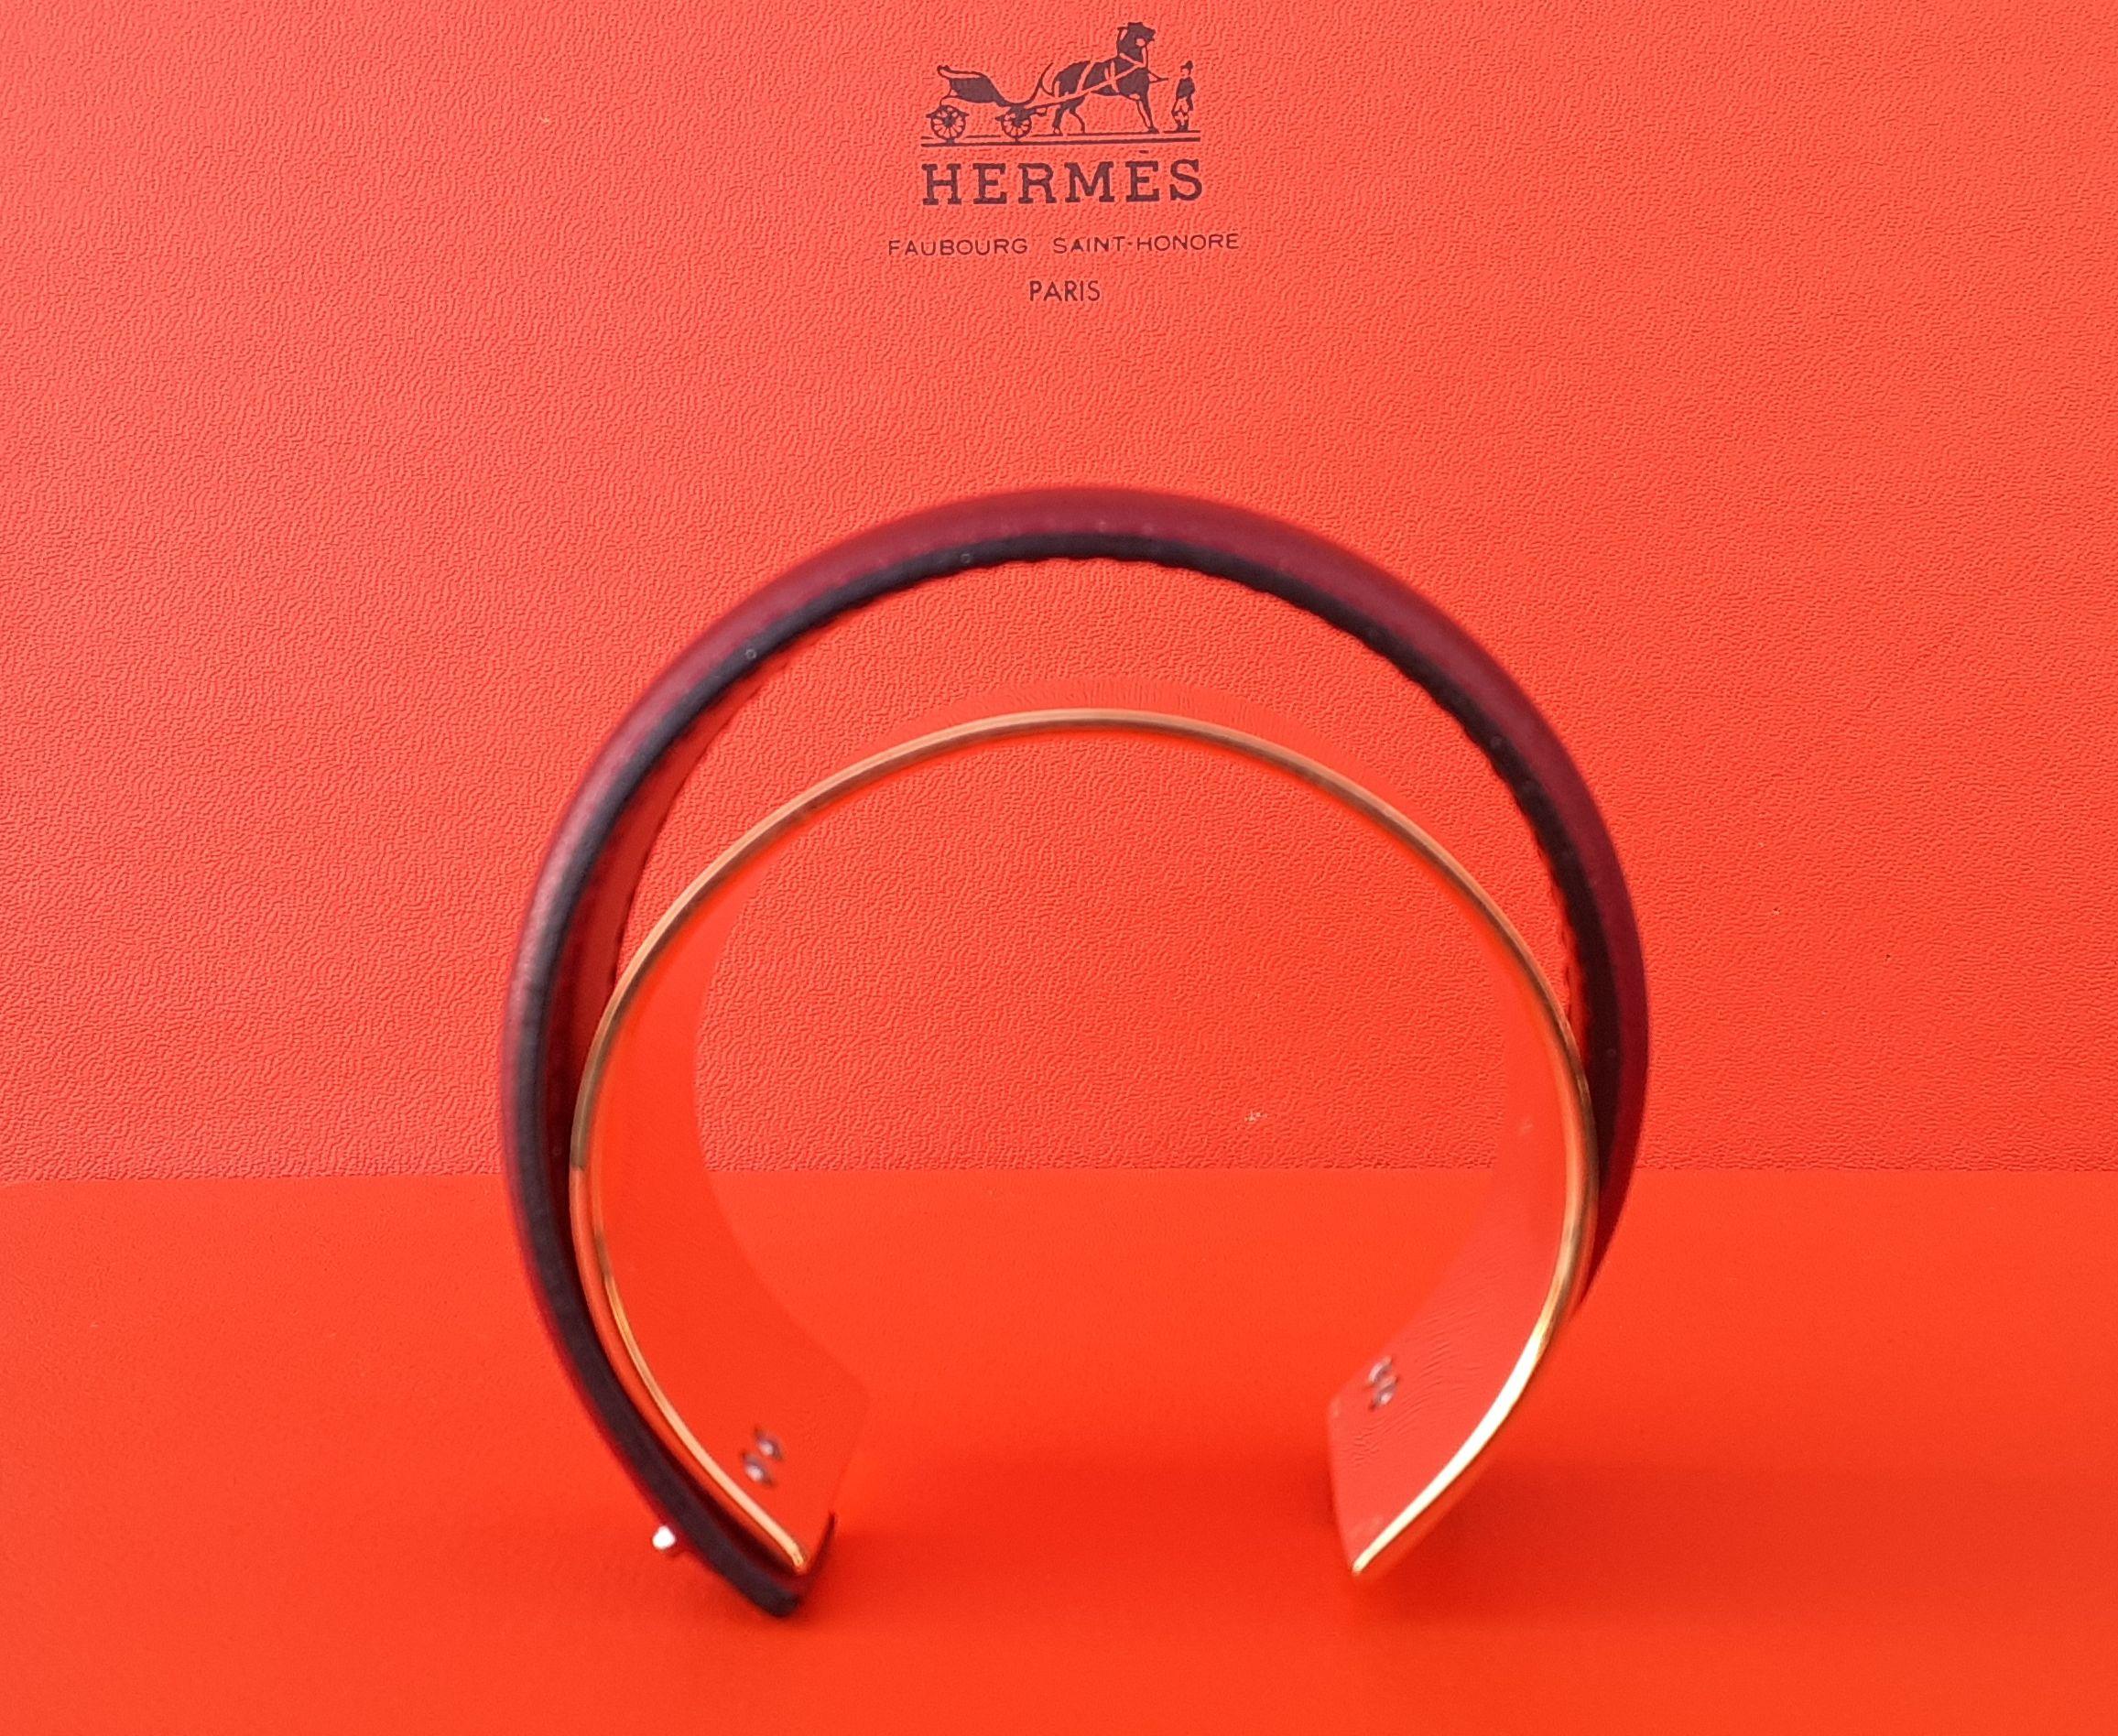 Exceptional Hermès Cuff Bracelet Golden Hdw and Rouge H Box Leather Size L For Sale 5